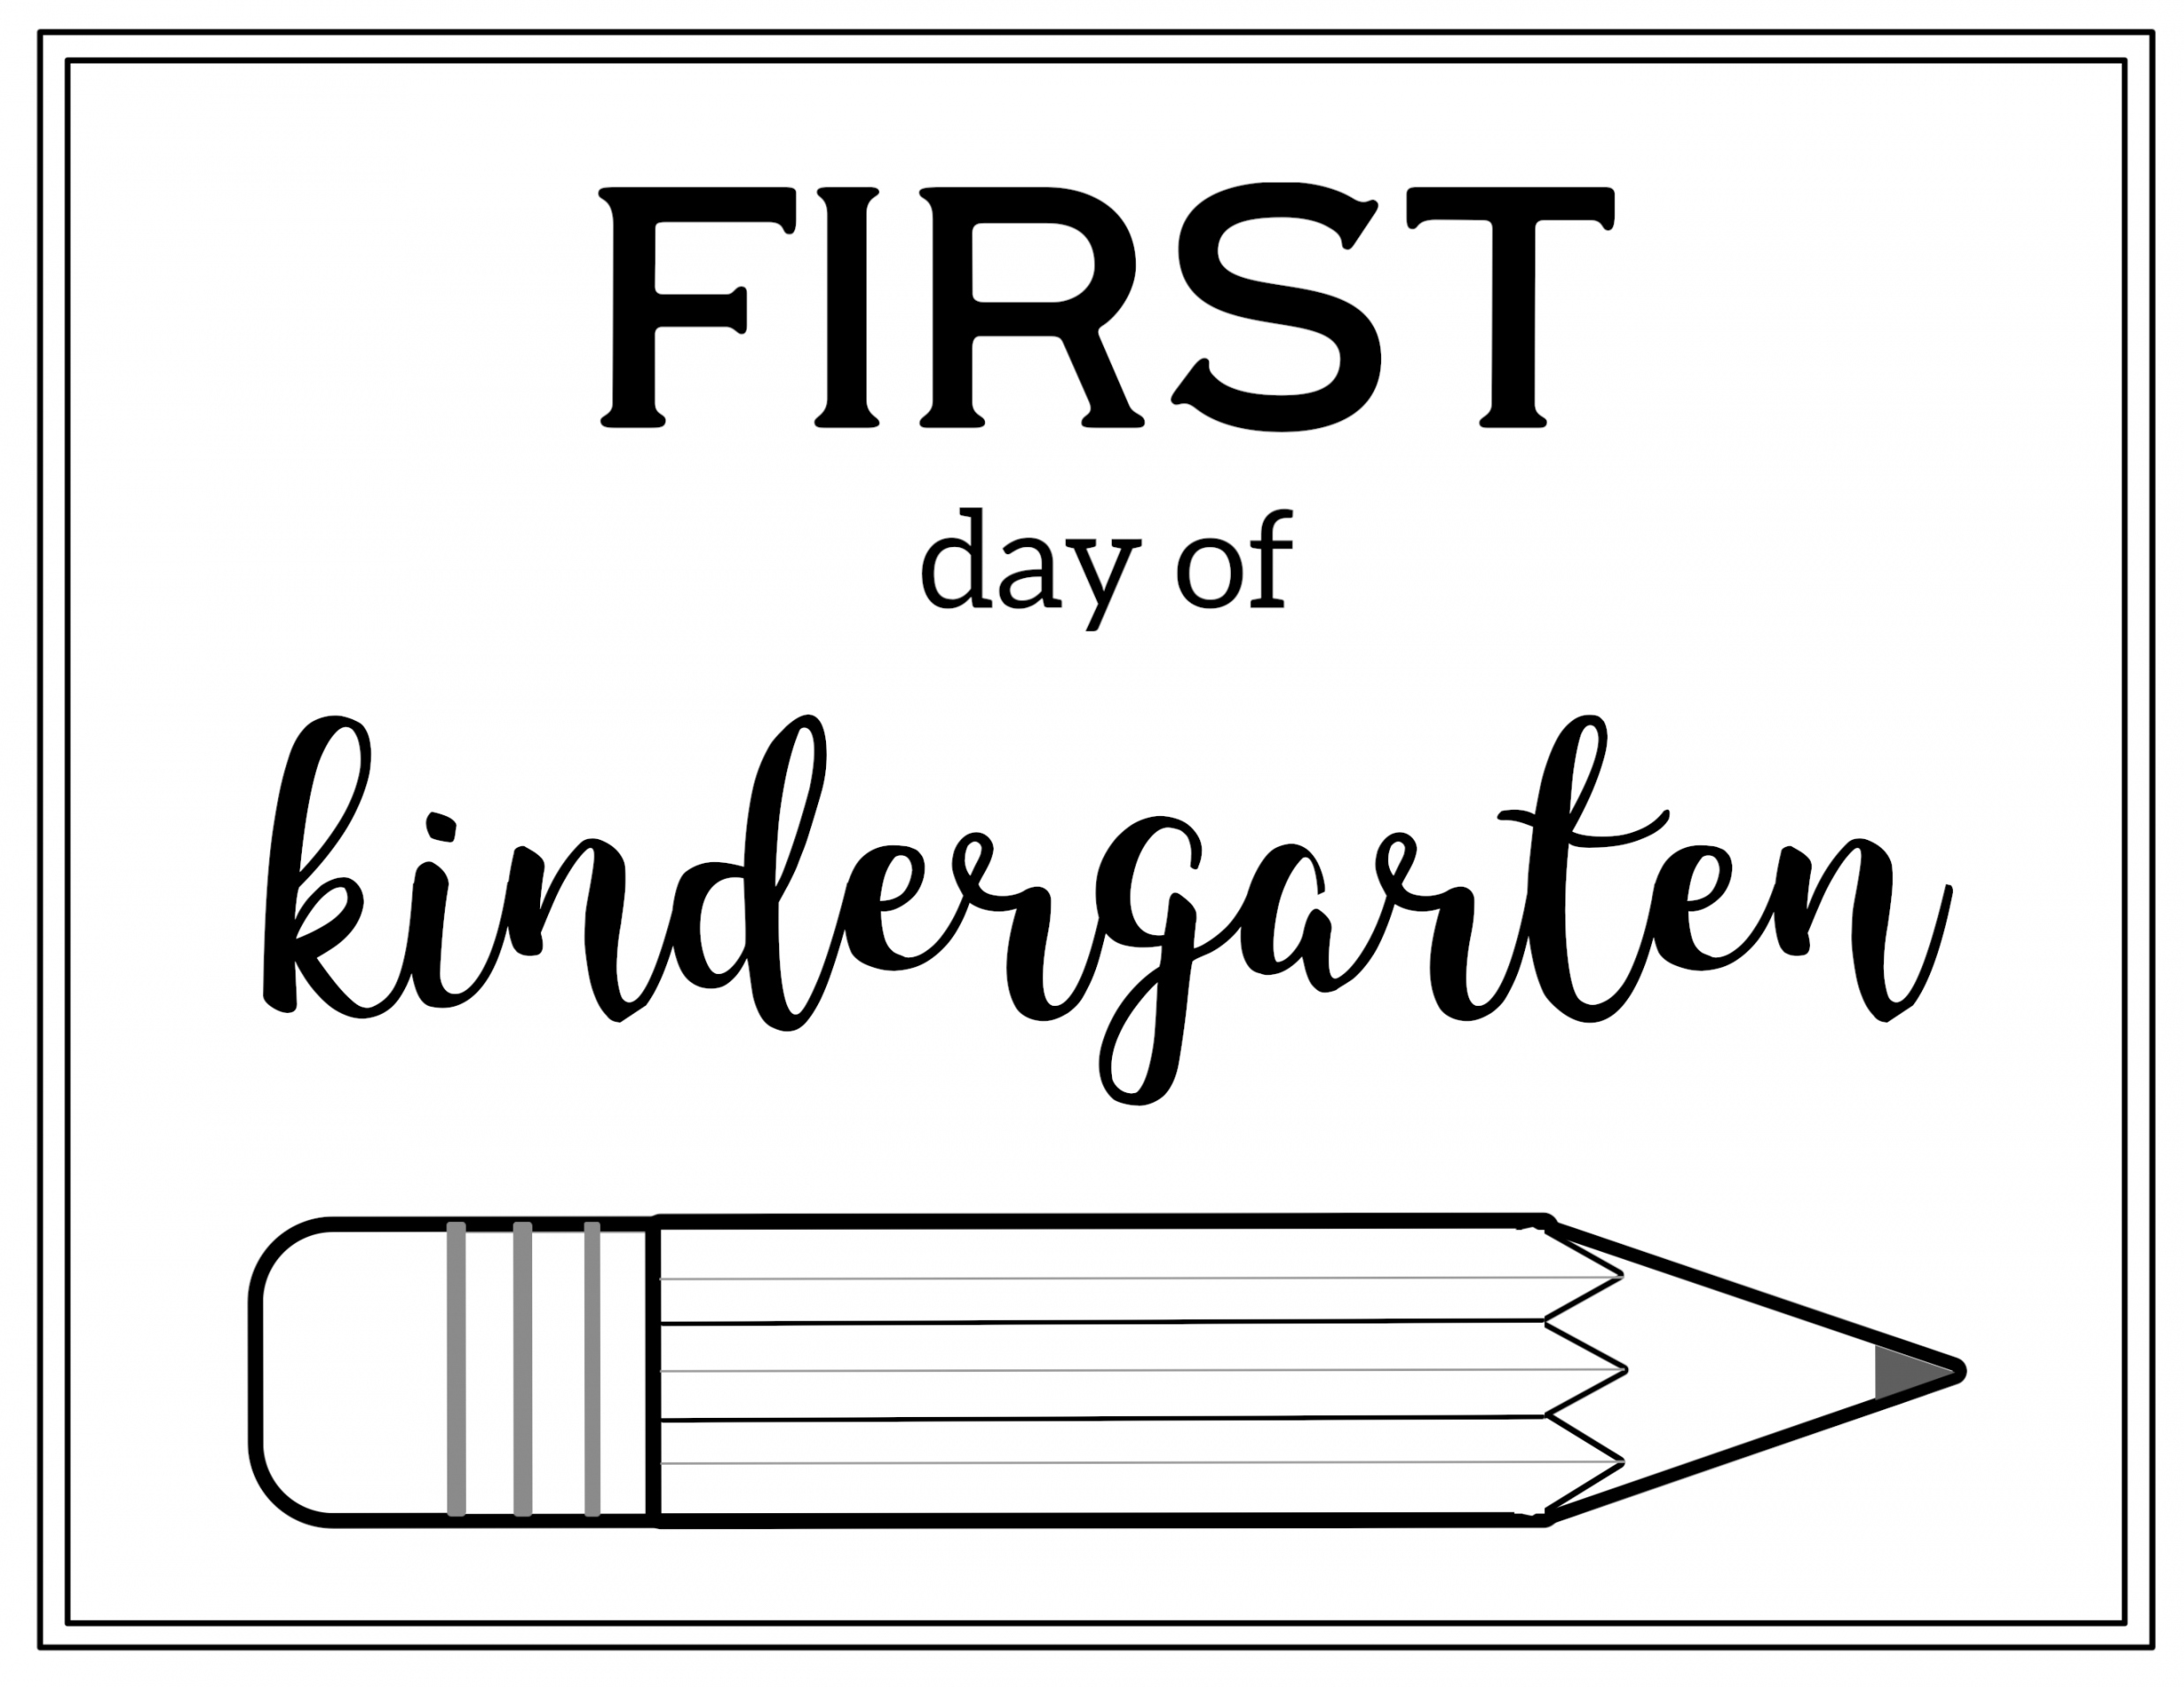 Free Printable First Day of School Sign Pencil - Paper Trail Design - FREE Printables - Free Printable First Day Of Kindergarten Sign